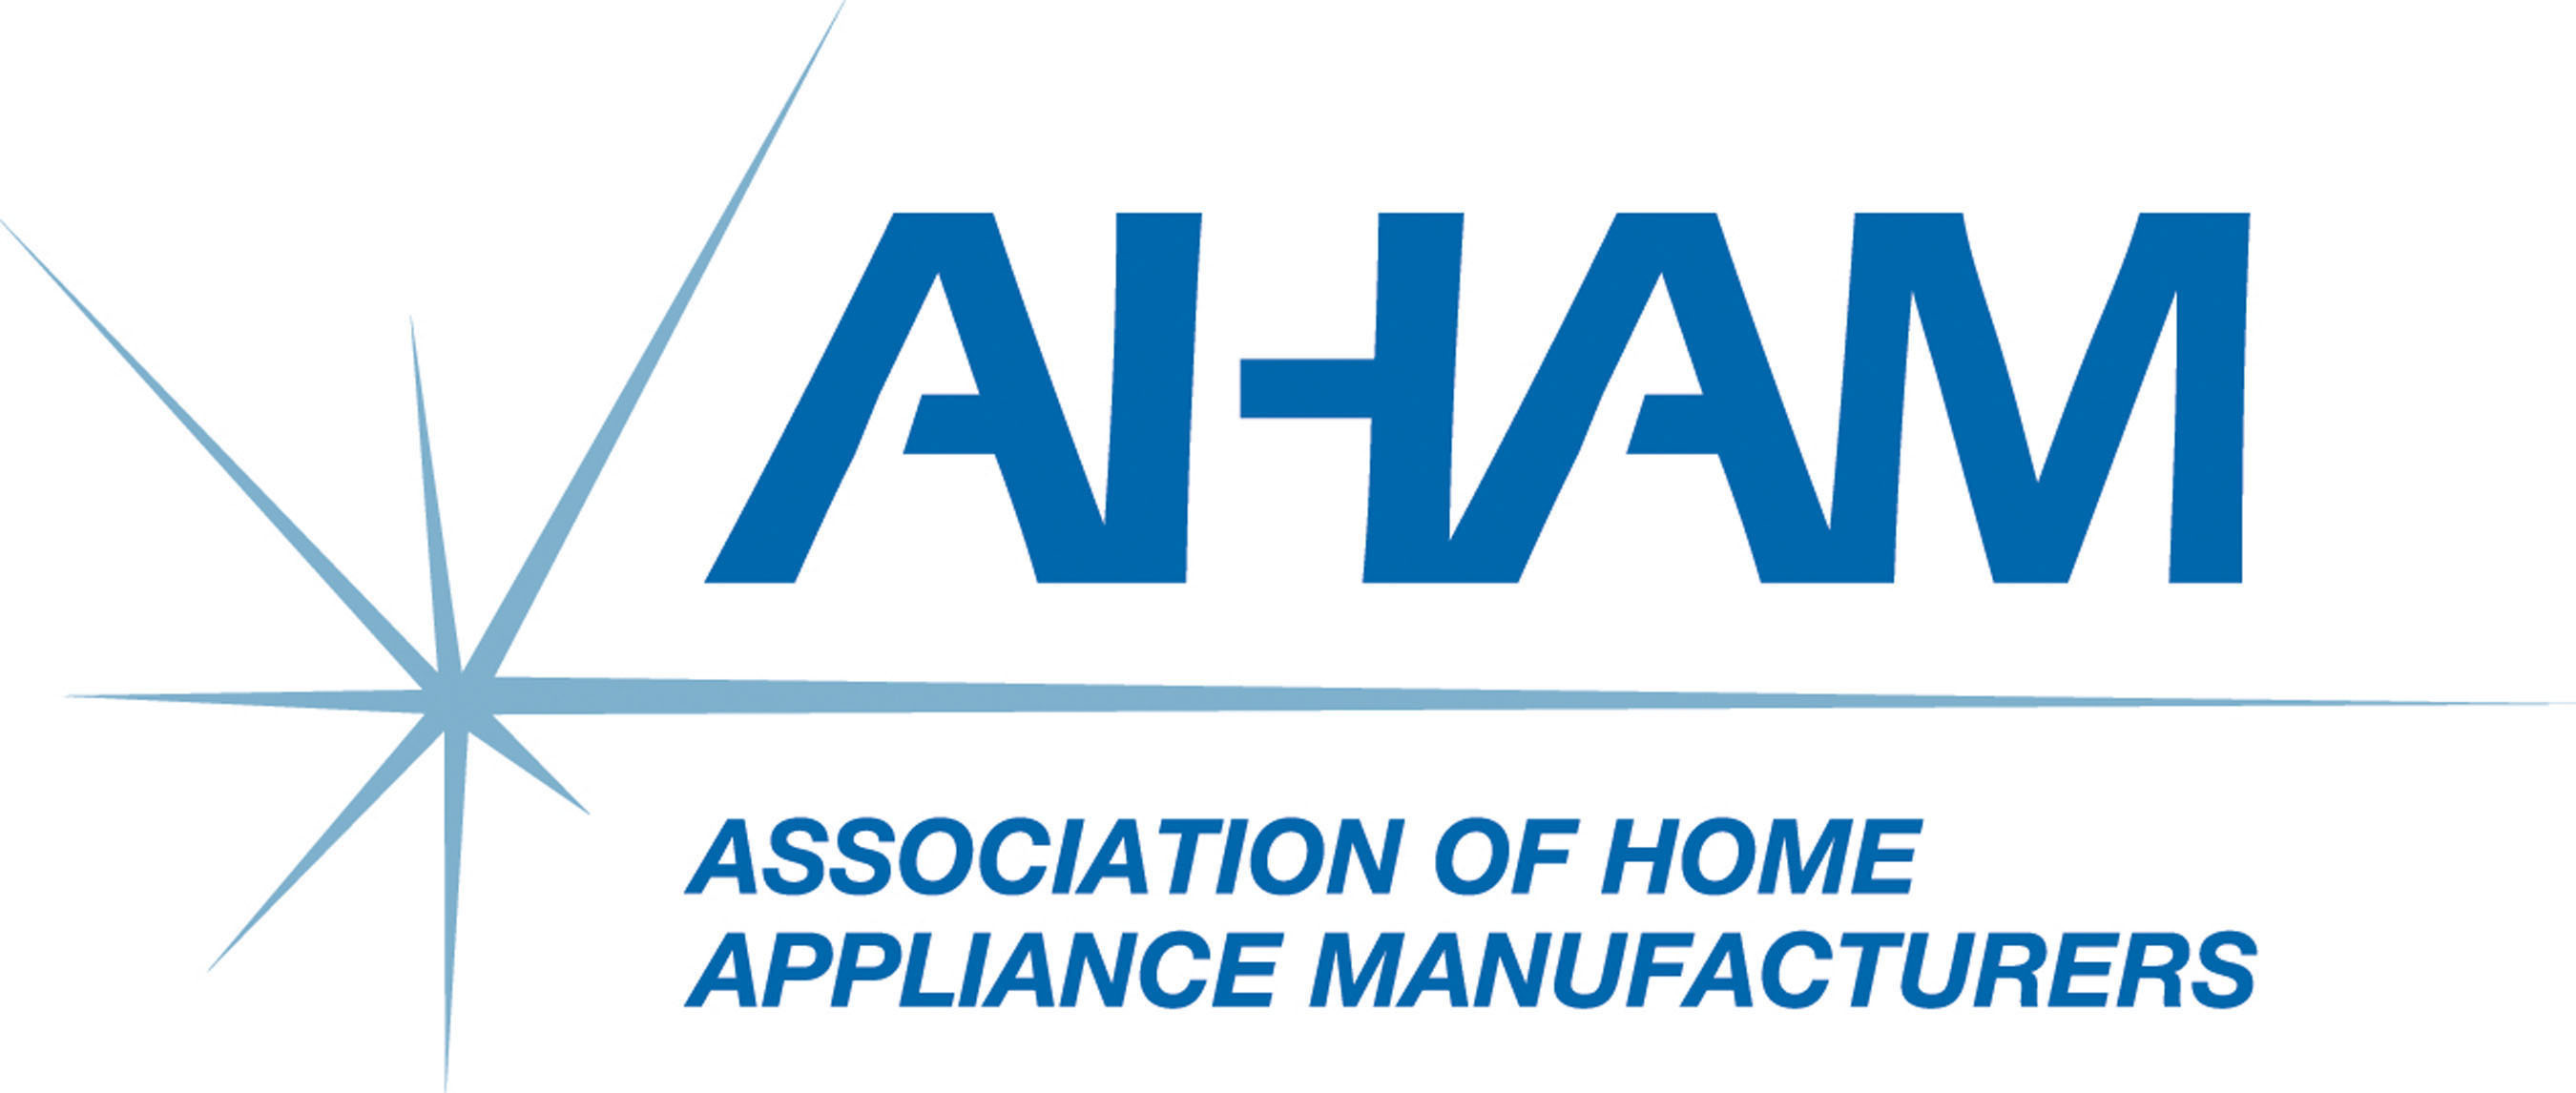 Association of Home Appliance Manufacturers. 1111 19th Street NW, Suite 402, Washington, DC 20036.